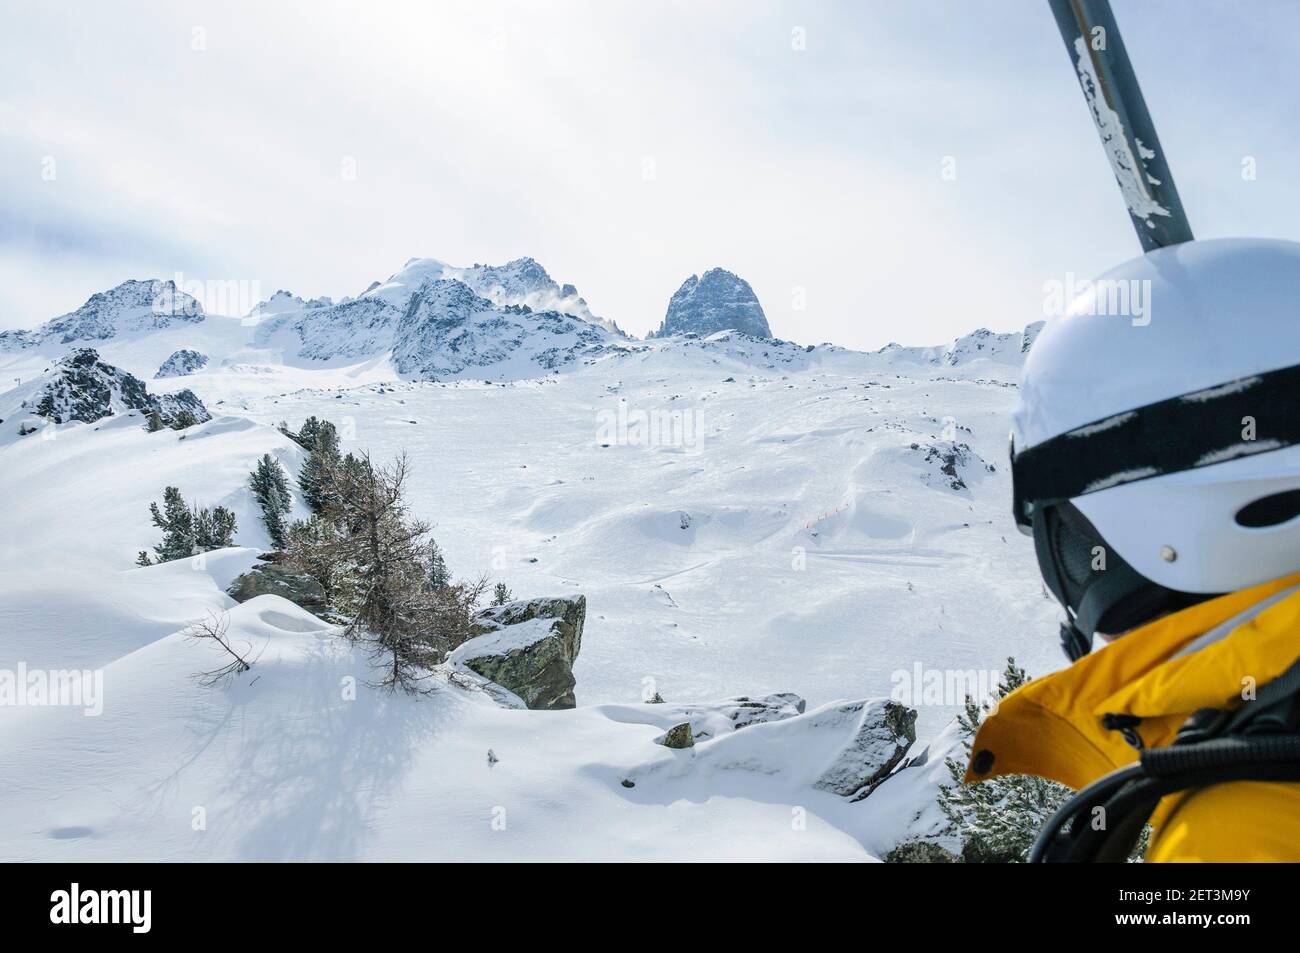 Ascending with chairlift in Grand Montets ski resort in France Stock Photo